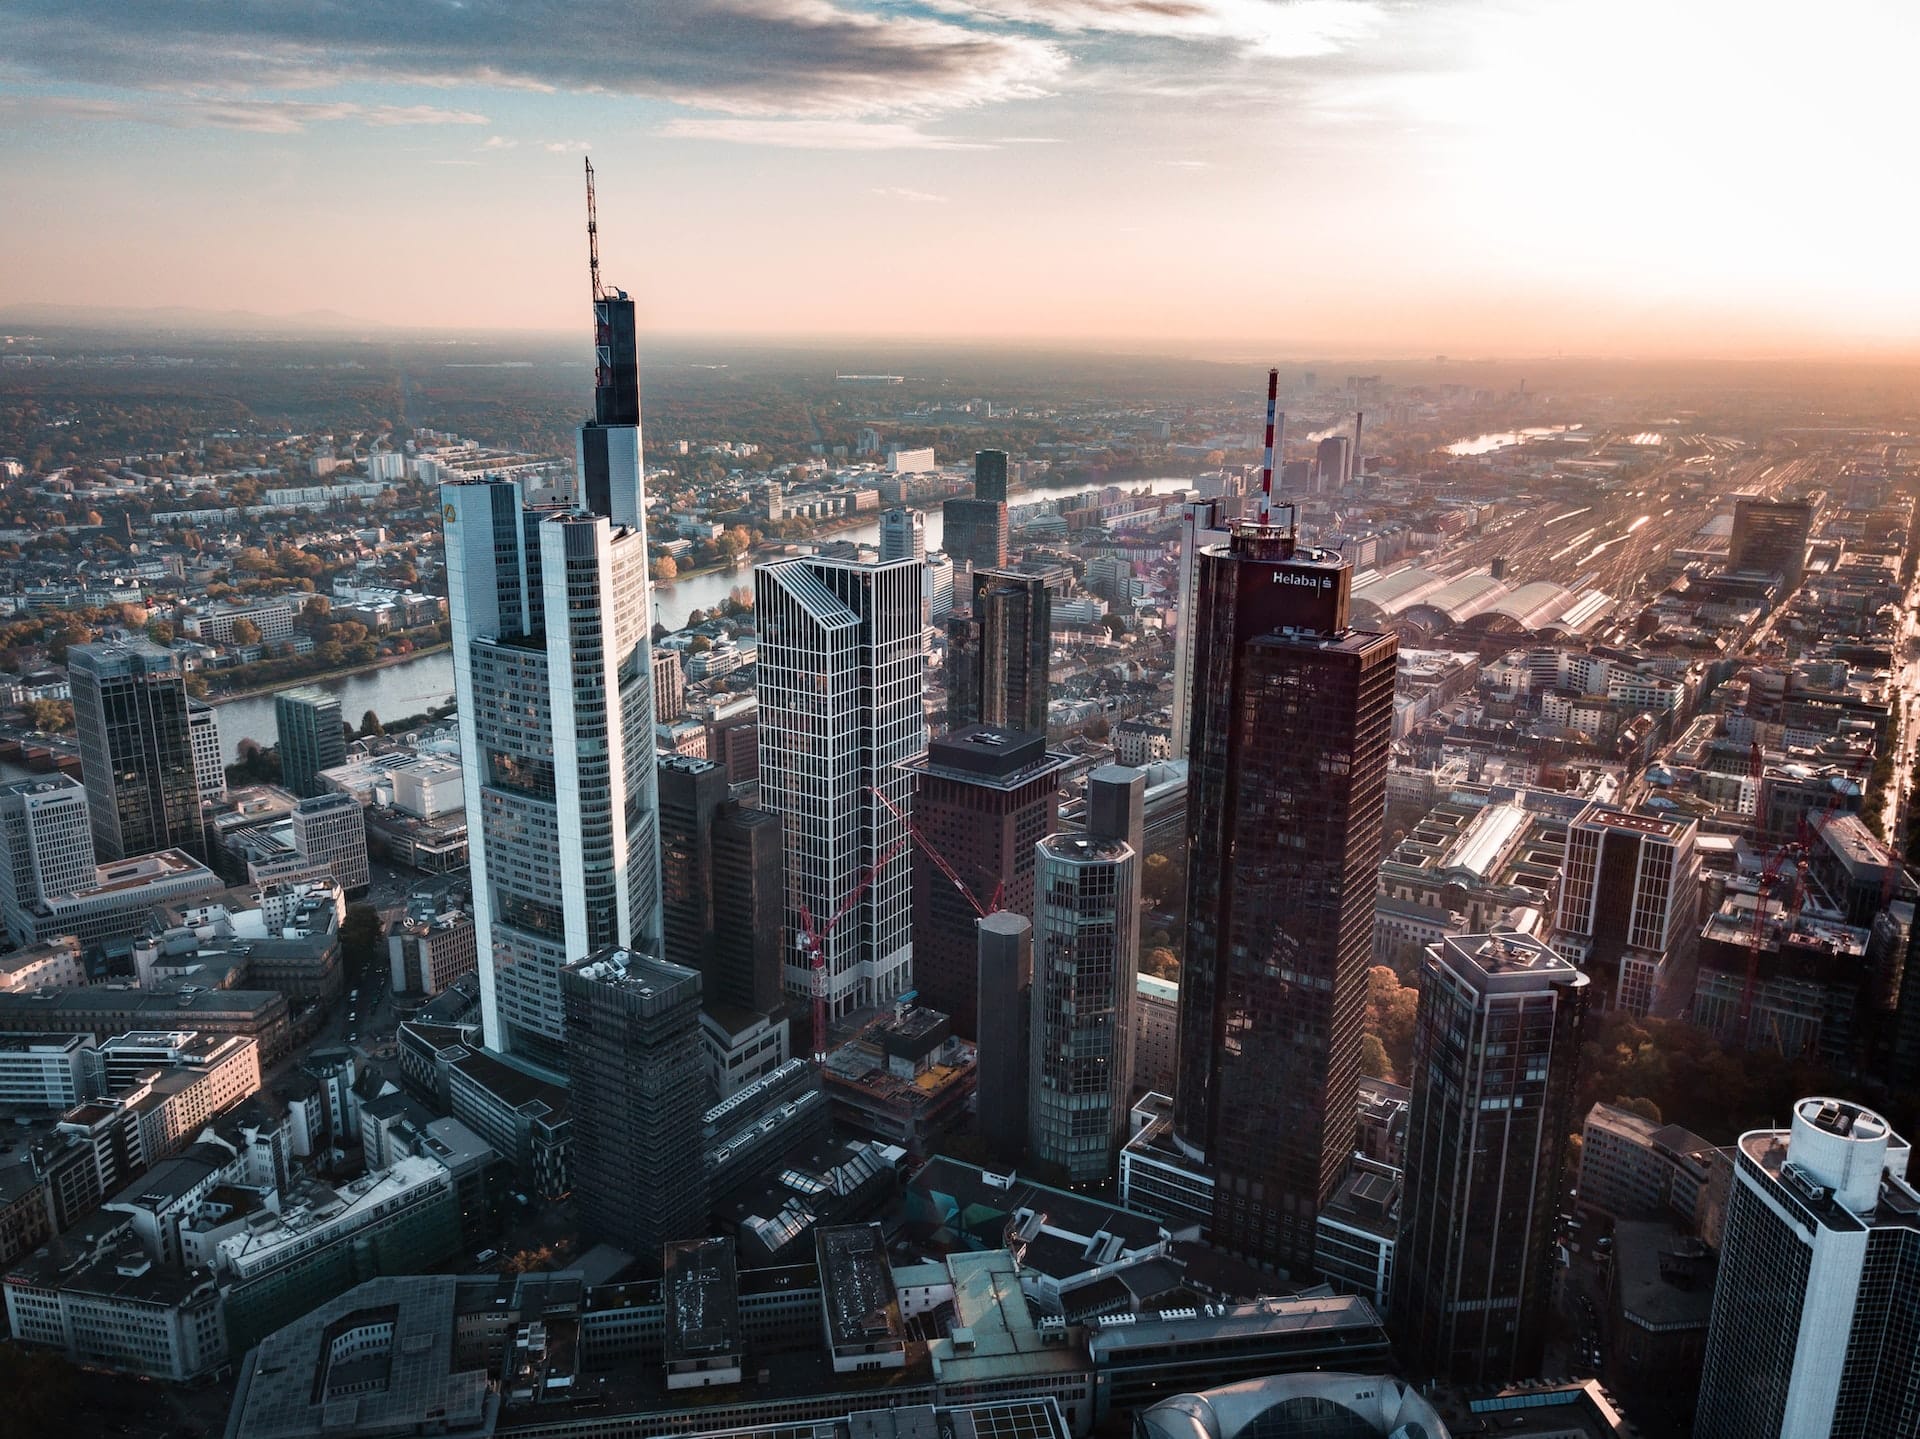 Home to some of the tallest skyscrapers in Europe, Frankfurt's Financial District is a dynamic business and commercial area packed with shopping areas and some of the best hotels in the city